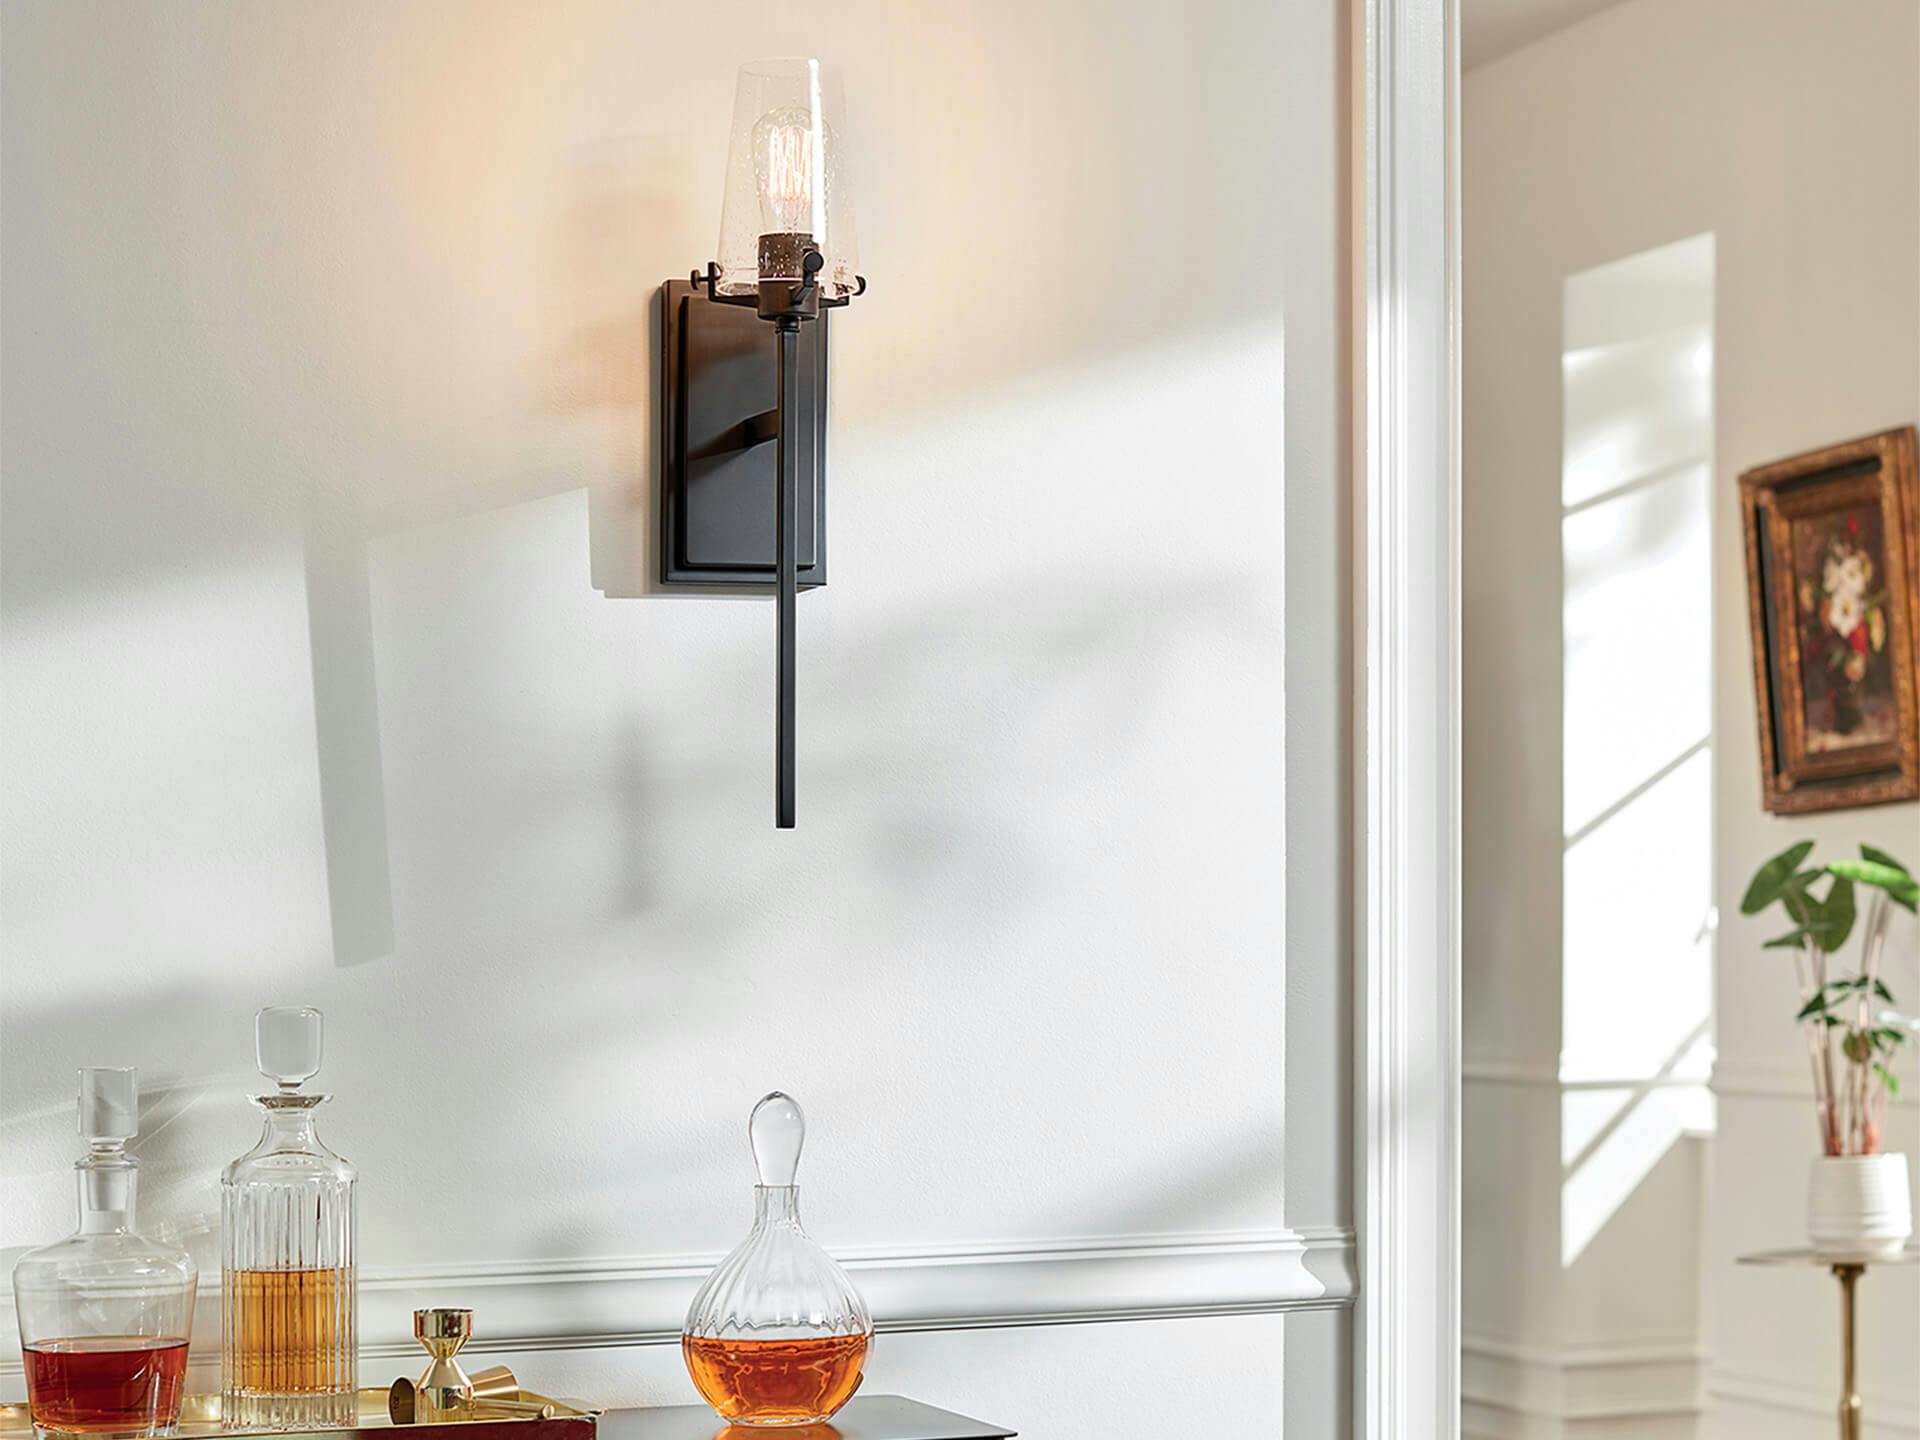 Alton wall sconce above a bar cabinet